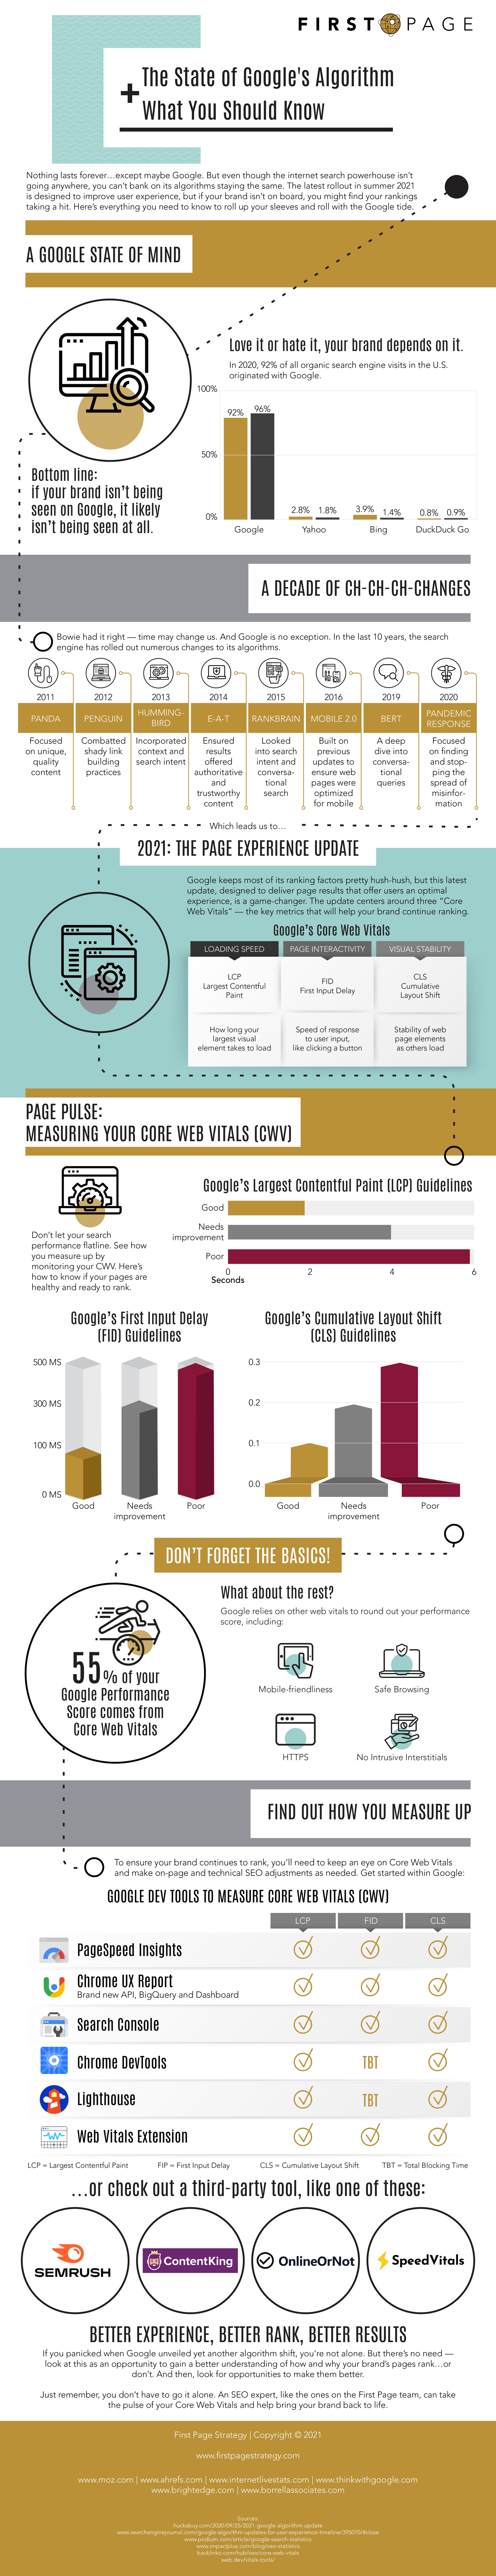 Infographic about The State of Googles Algorithm + What You Should Know